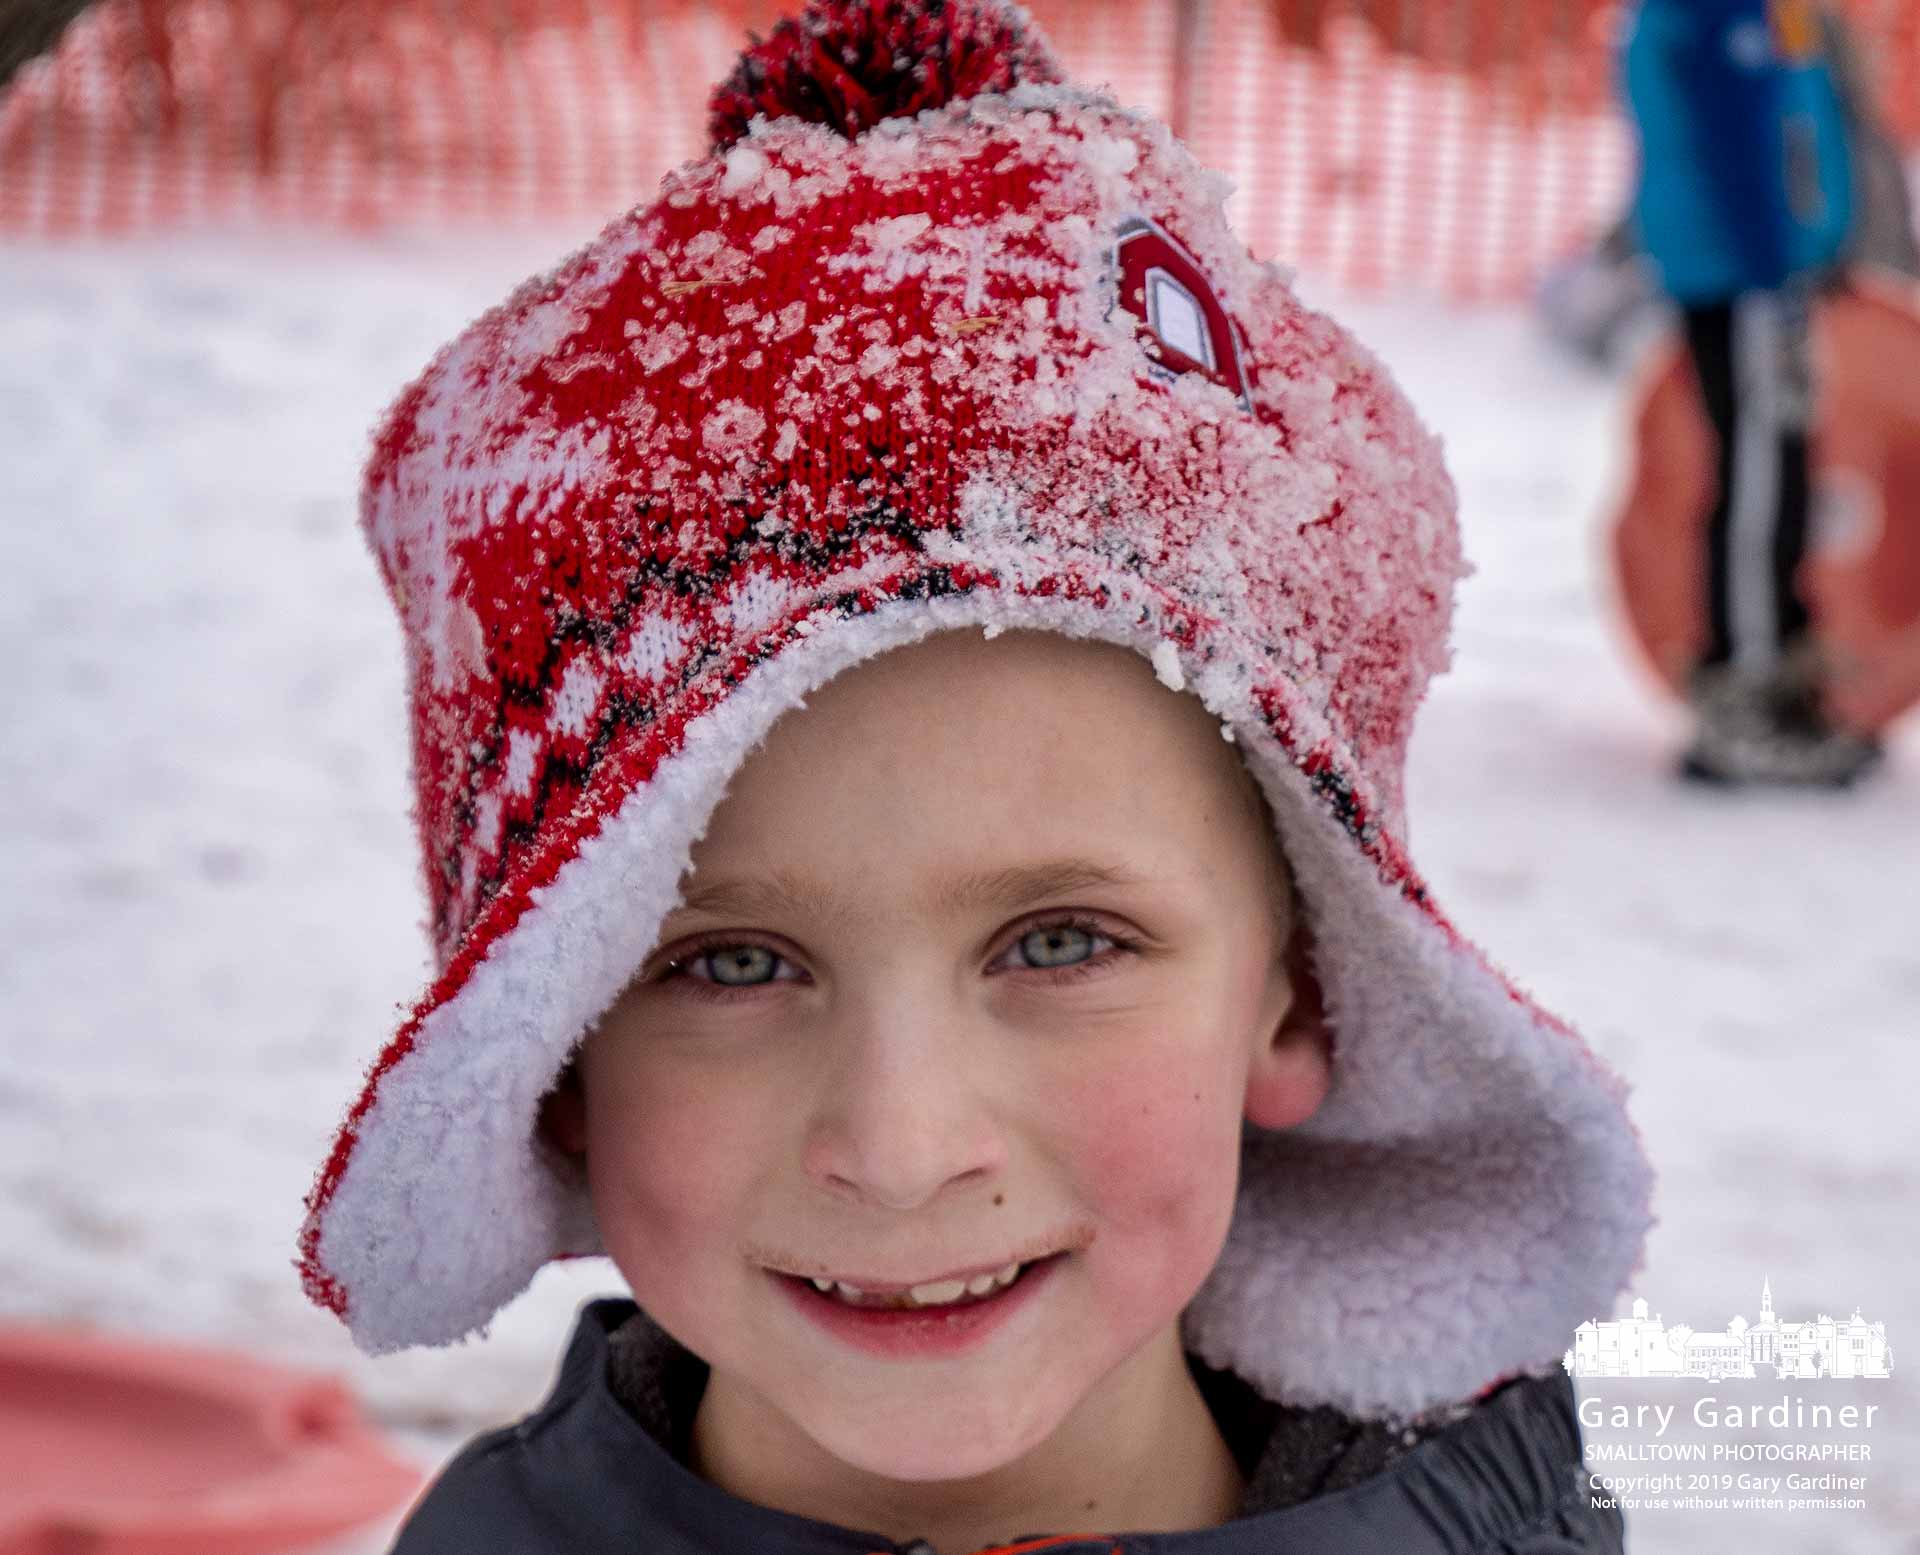 A young boy, stocking cap coated with snow and his cheeks turned red in the cold, smiles after ascending the sledding hill at Alum Creek Park North following another successful run down the slope. My Final Photo for Feb. 1, 2019.